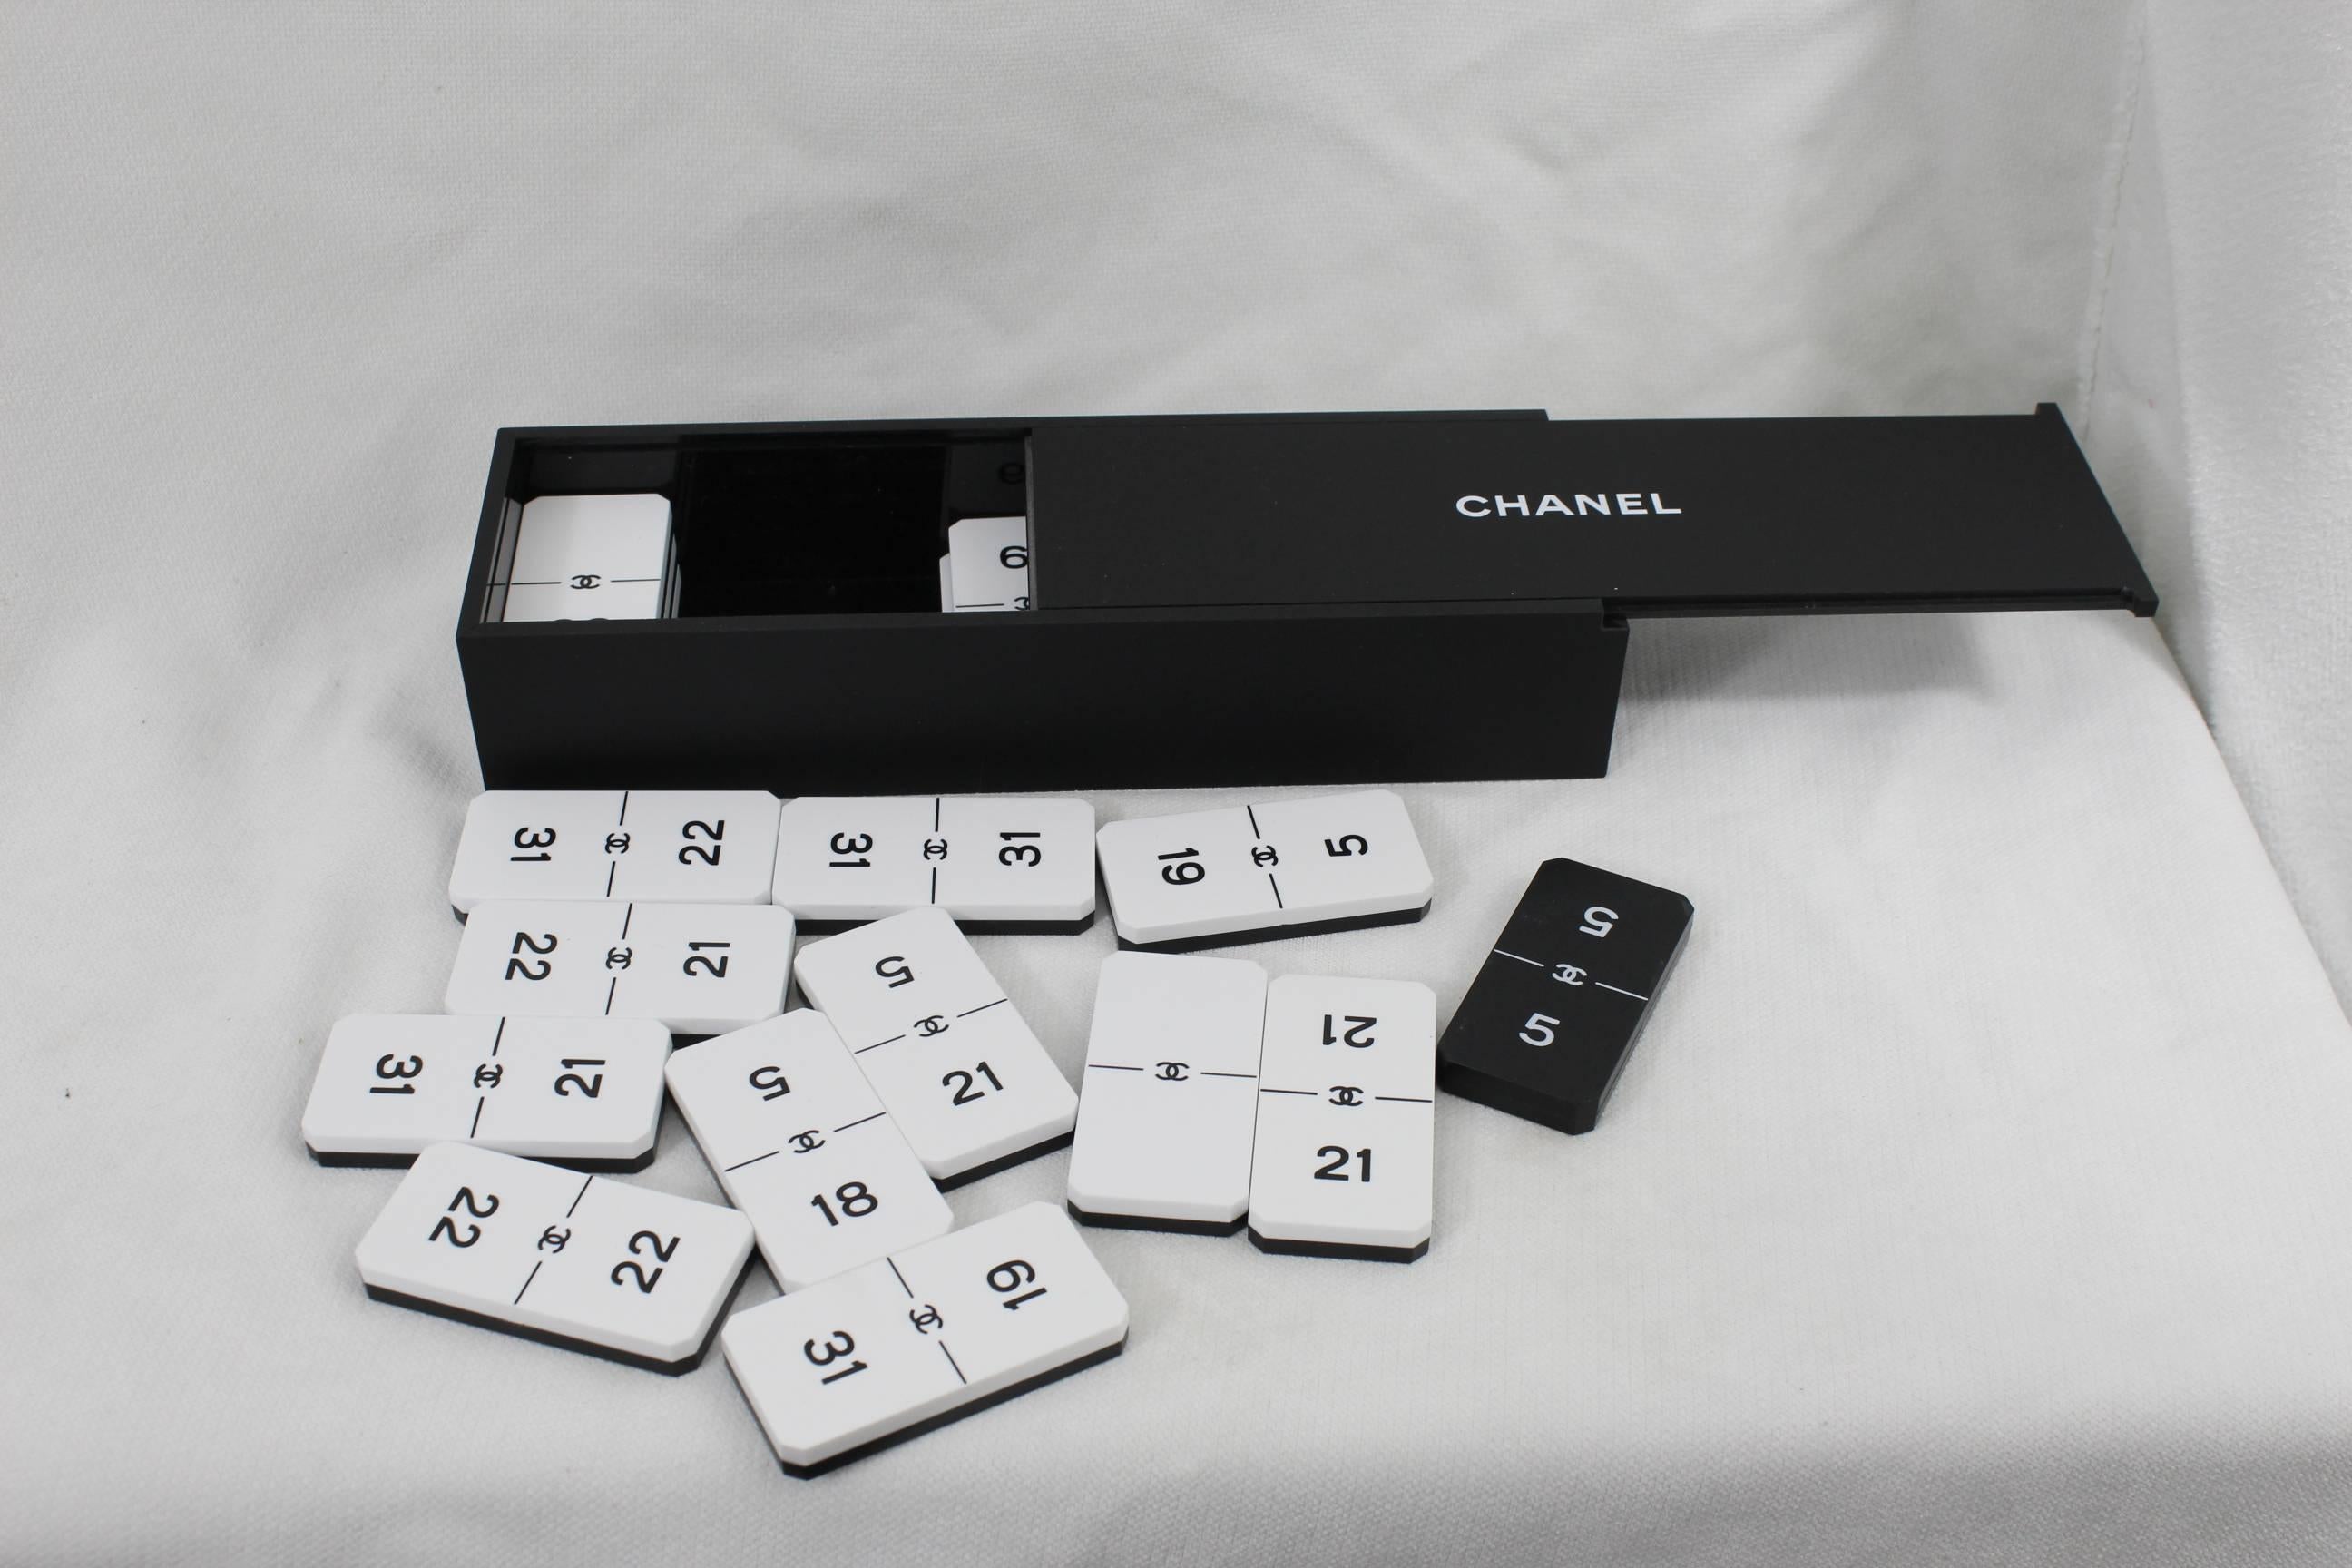 New never used Chanel Vip Gift Domino set

In rigid Chanel box

